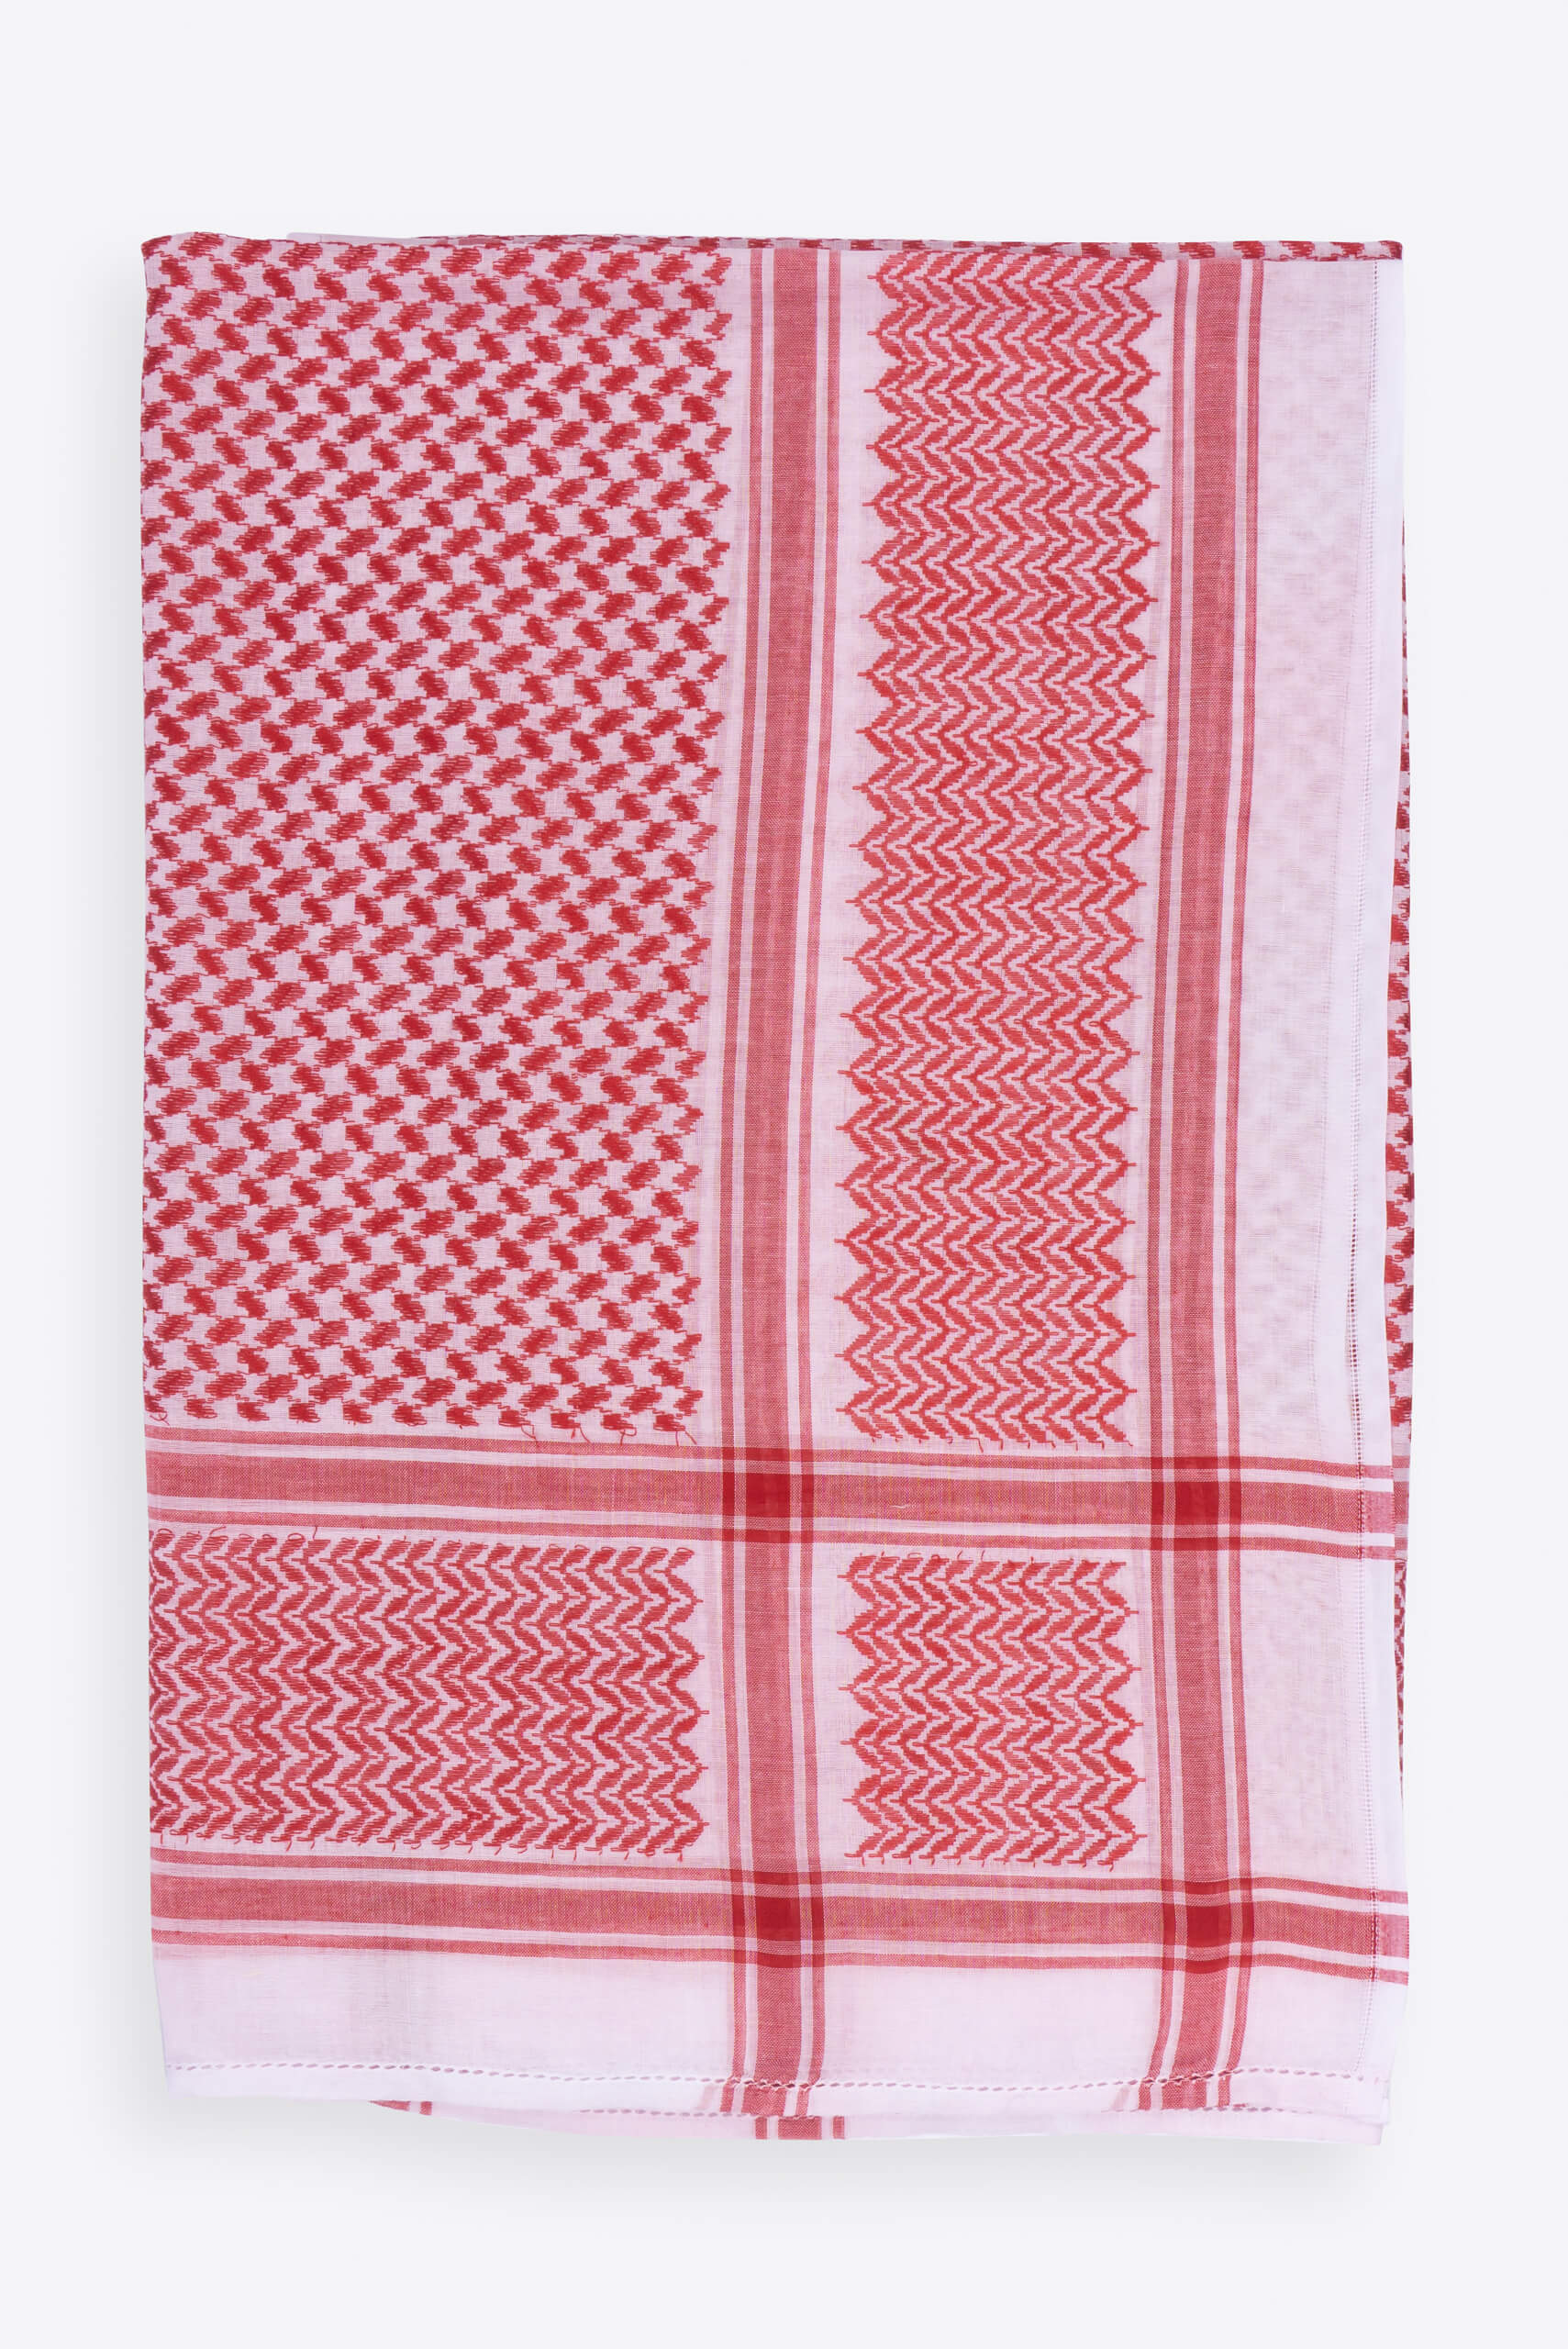 Saudi Red Shemagh - Shemagh Scarf - Muslim Lifestyle Store